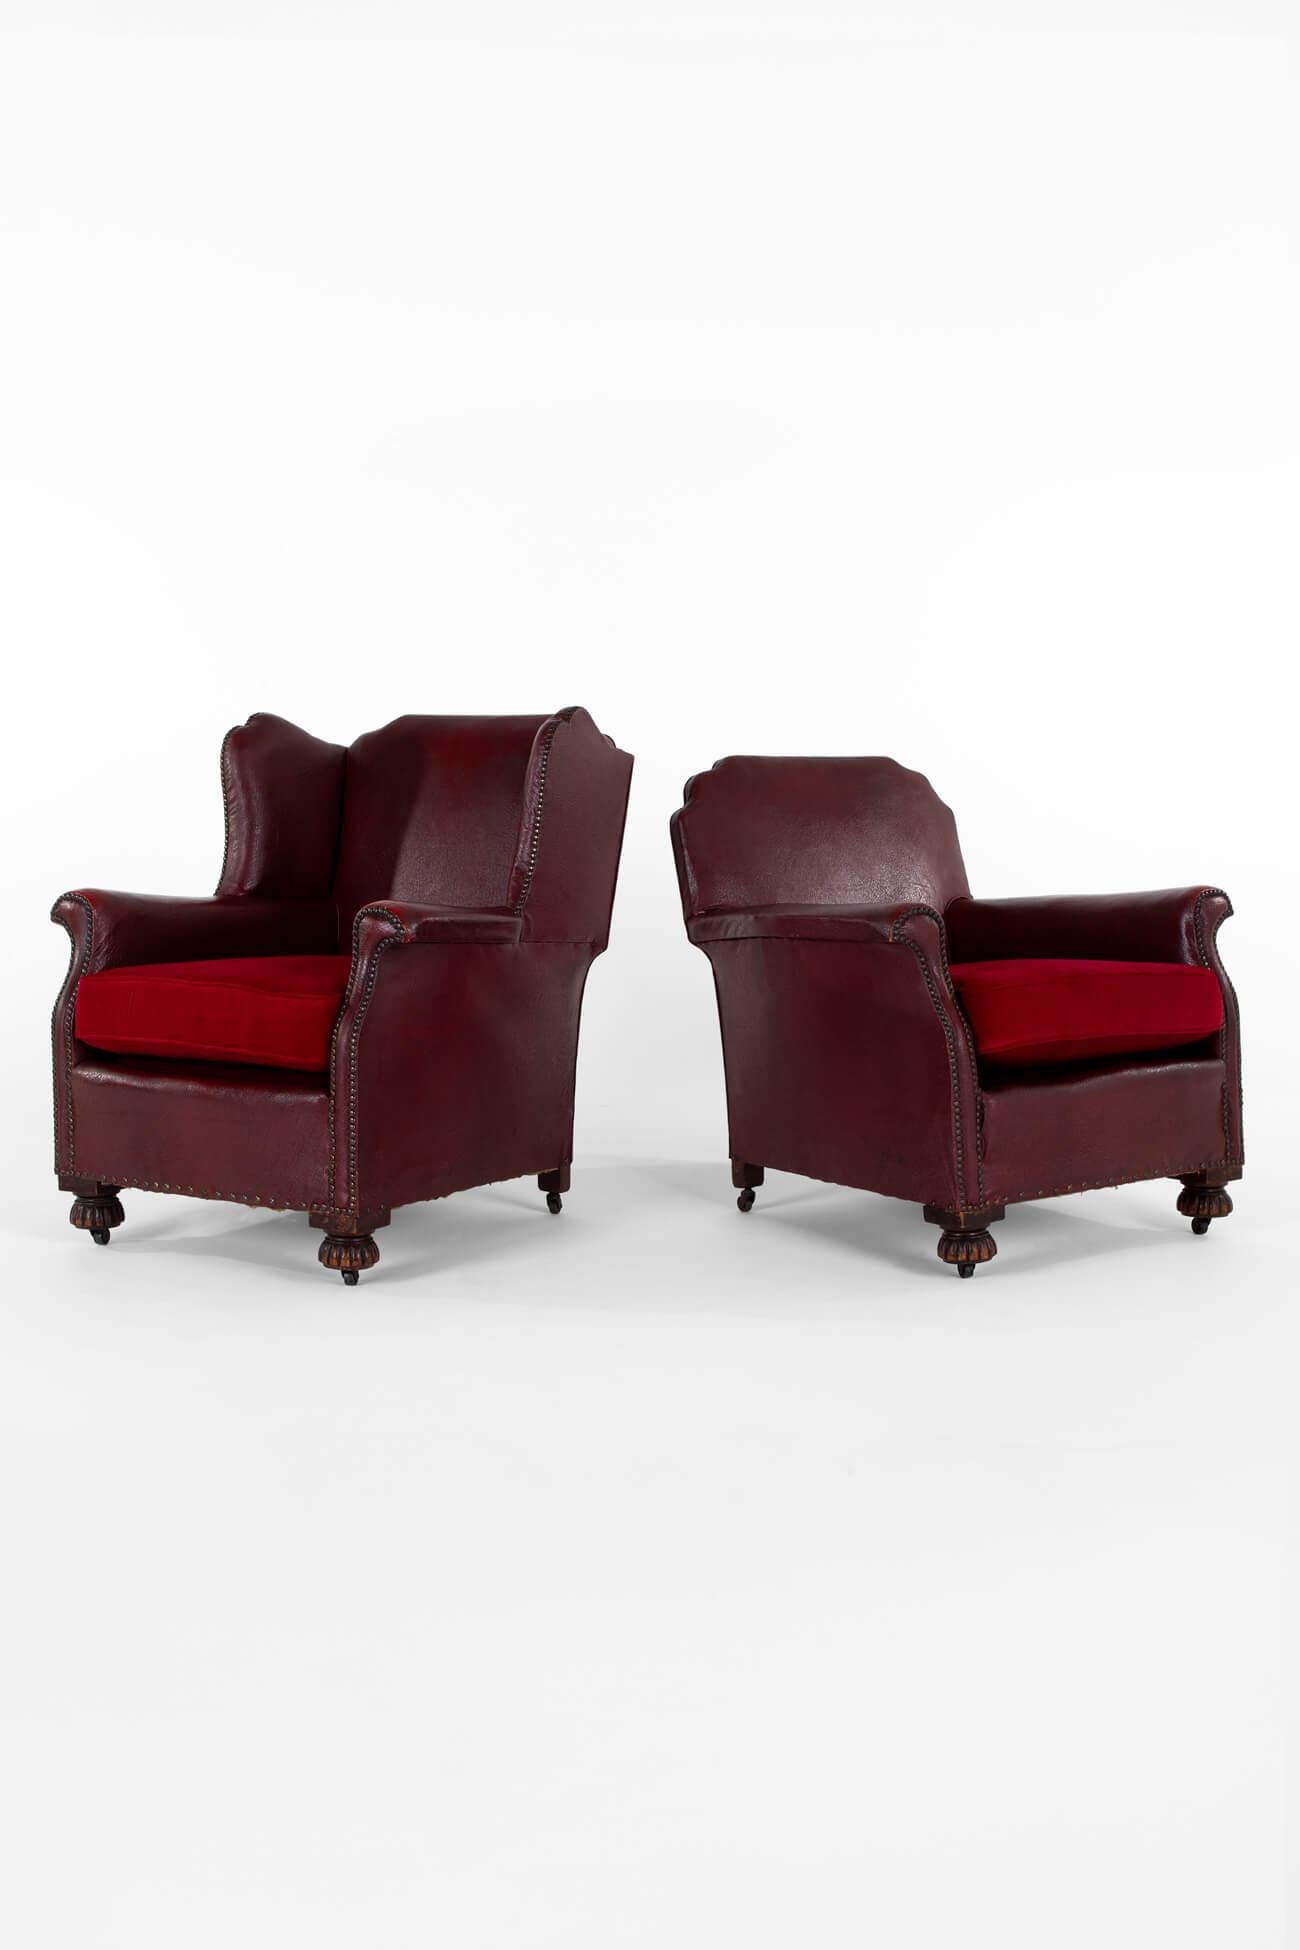 A superb pair of Edwardian fireside chairs in faux burgundy leather with just the right amount of wear to the arms and backs.

The pair are a mix of styles with the ‘male’ having a high wing back and the slightly shorter ‘female’ chair with a square